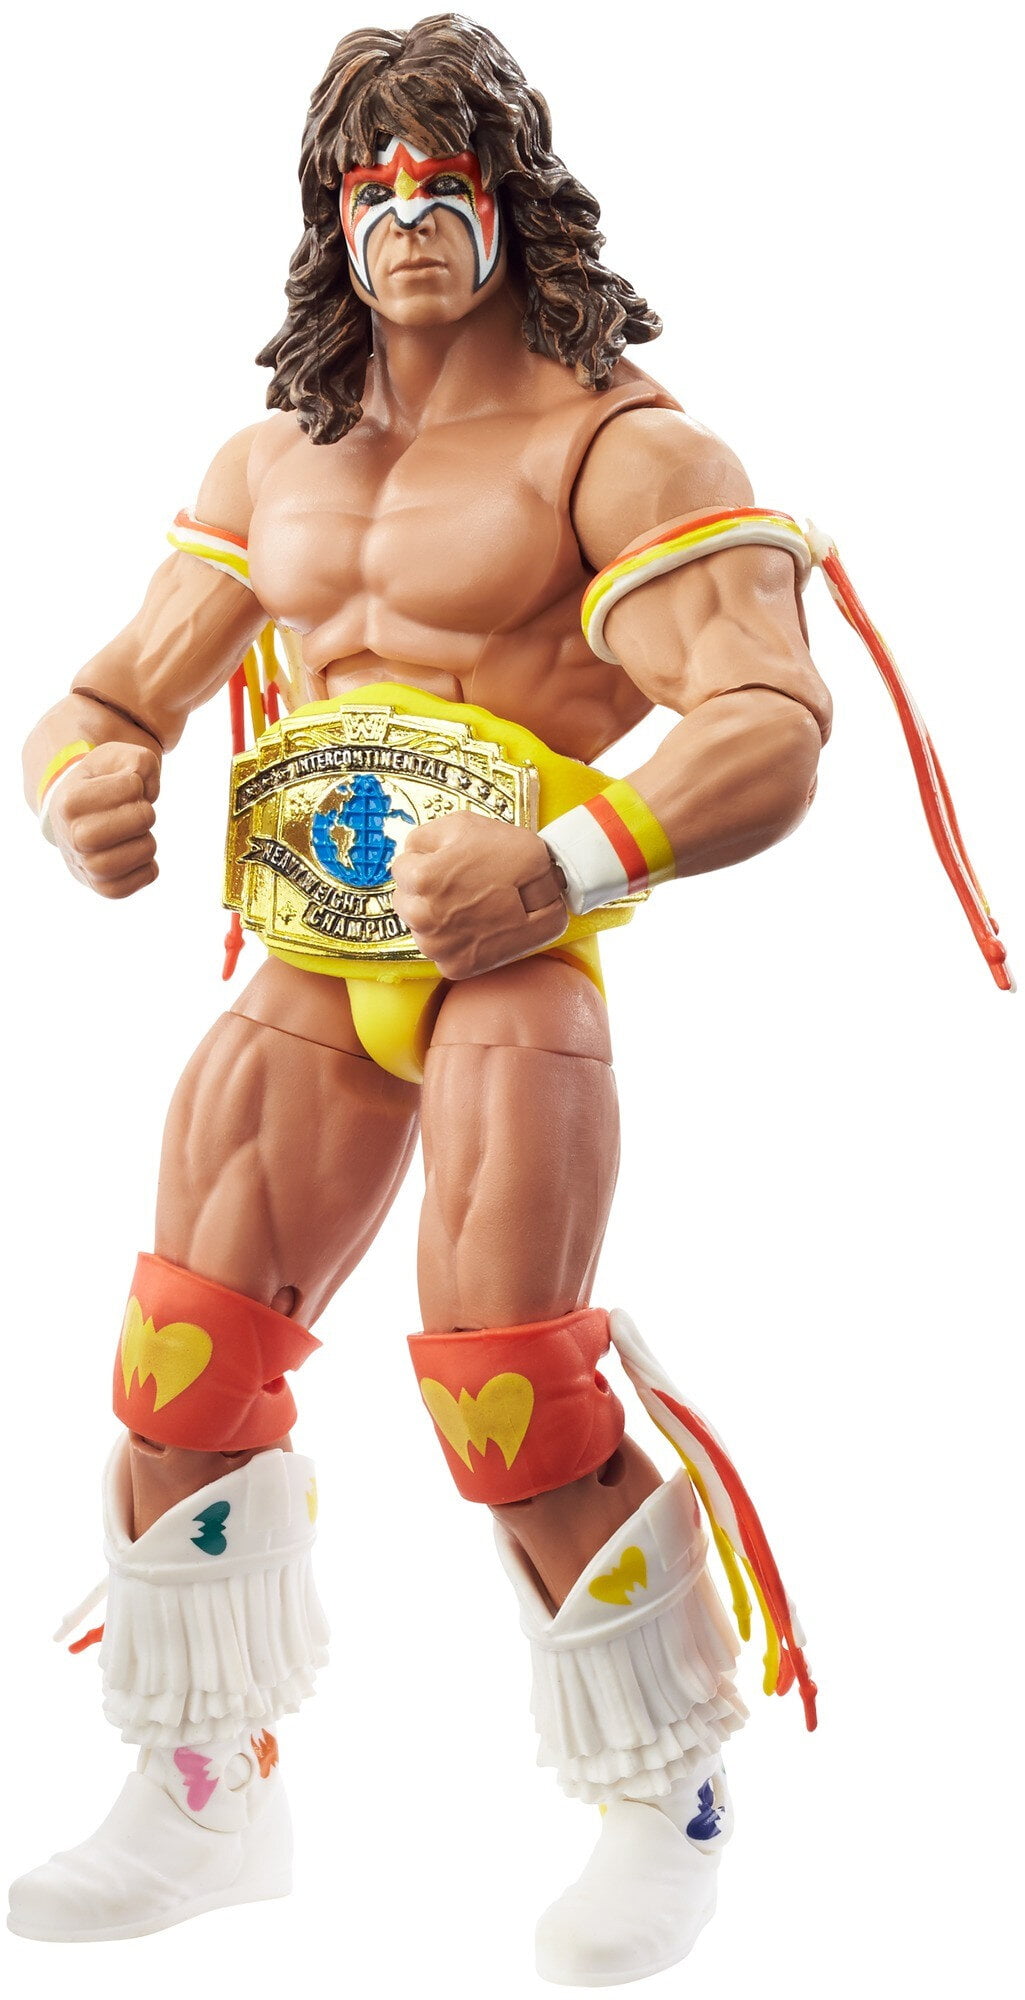 for sale online GYC28 Mattel Elite Collection WWE Elite Warriors Royal Rumble The Ultimate Warrior 6" Action Figure 